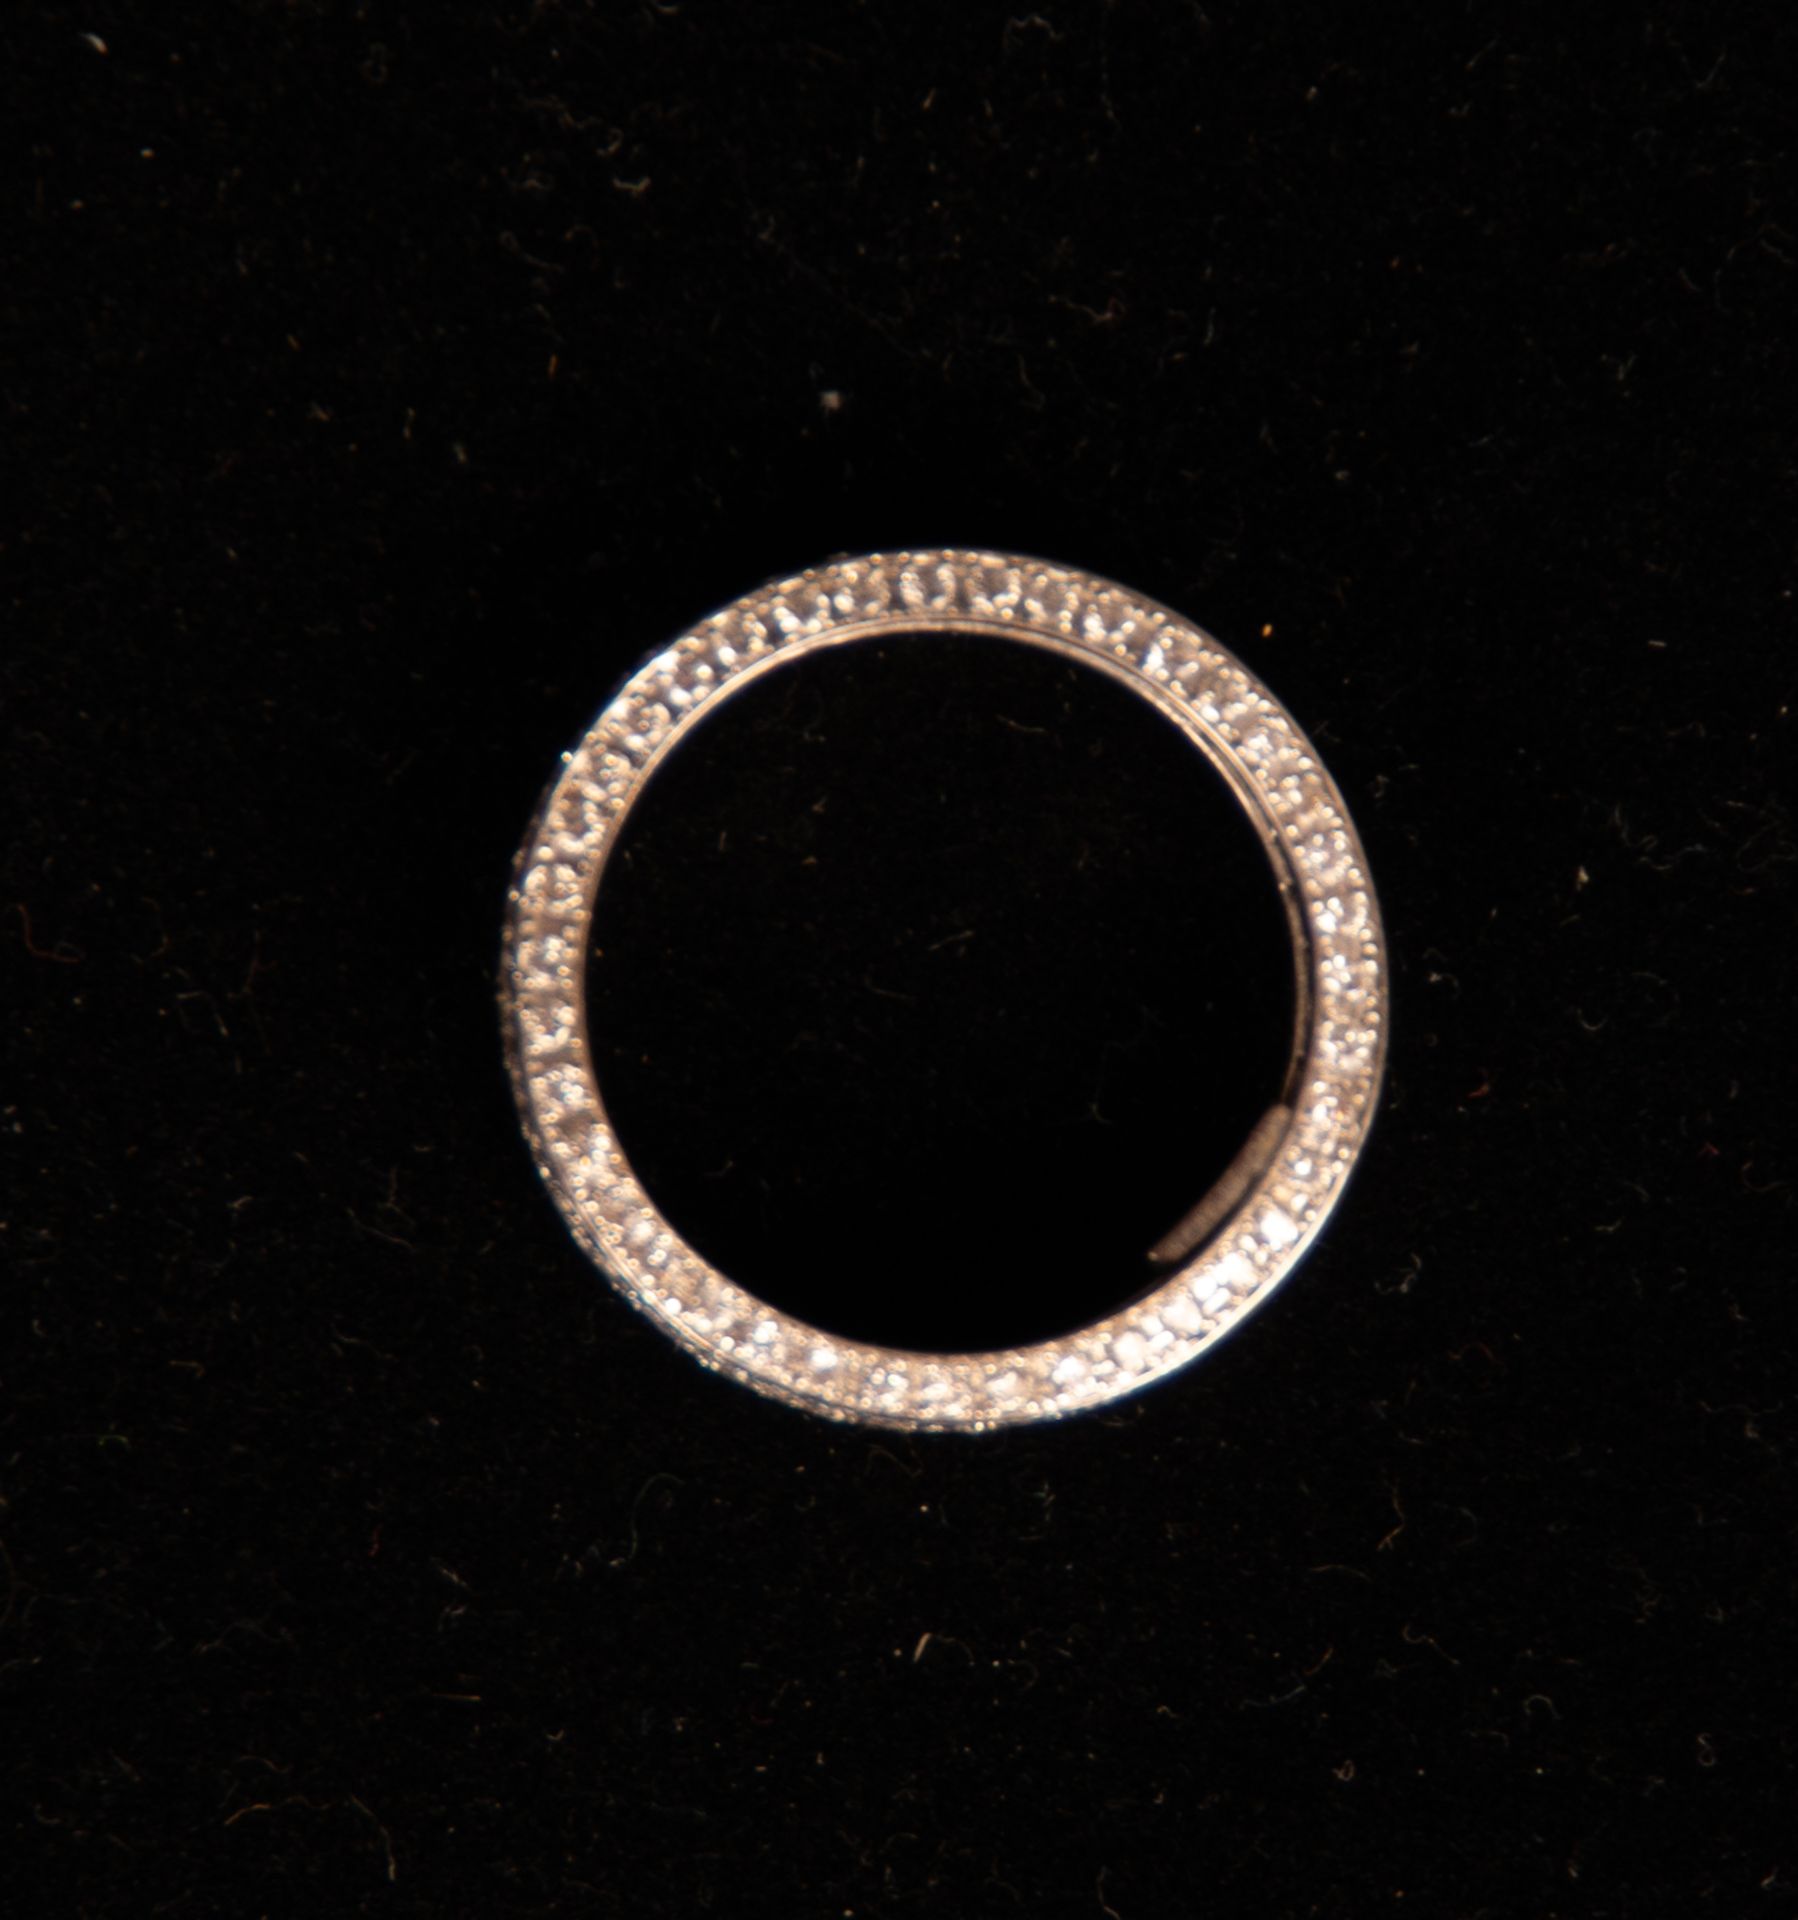 Ring in white gold and diamonds set all over the side - Image 2 of 4